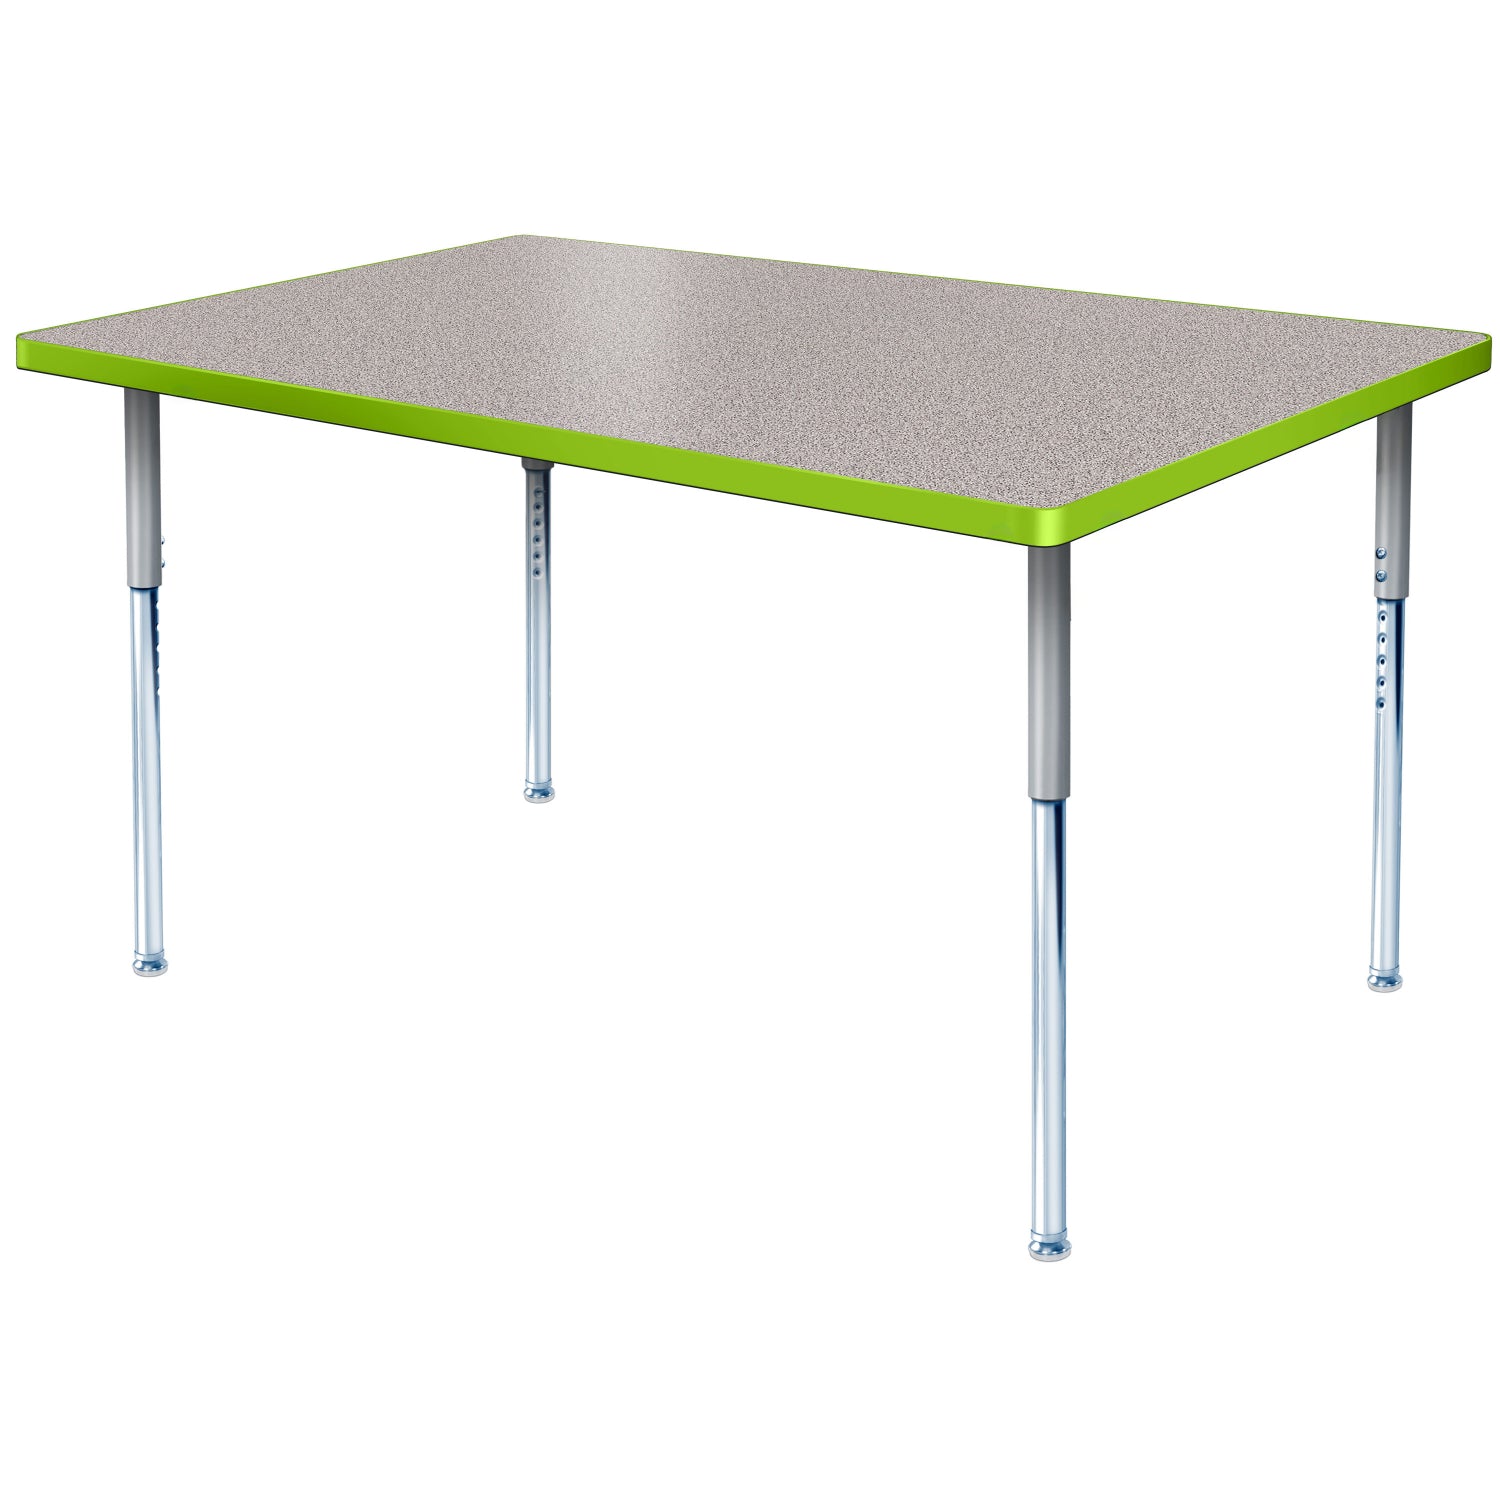 Modern Classic Series 42 x 60" Rectangular Activity Table with High Pressure Laminate Top, Adjustable Height Legs